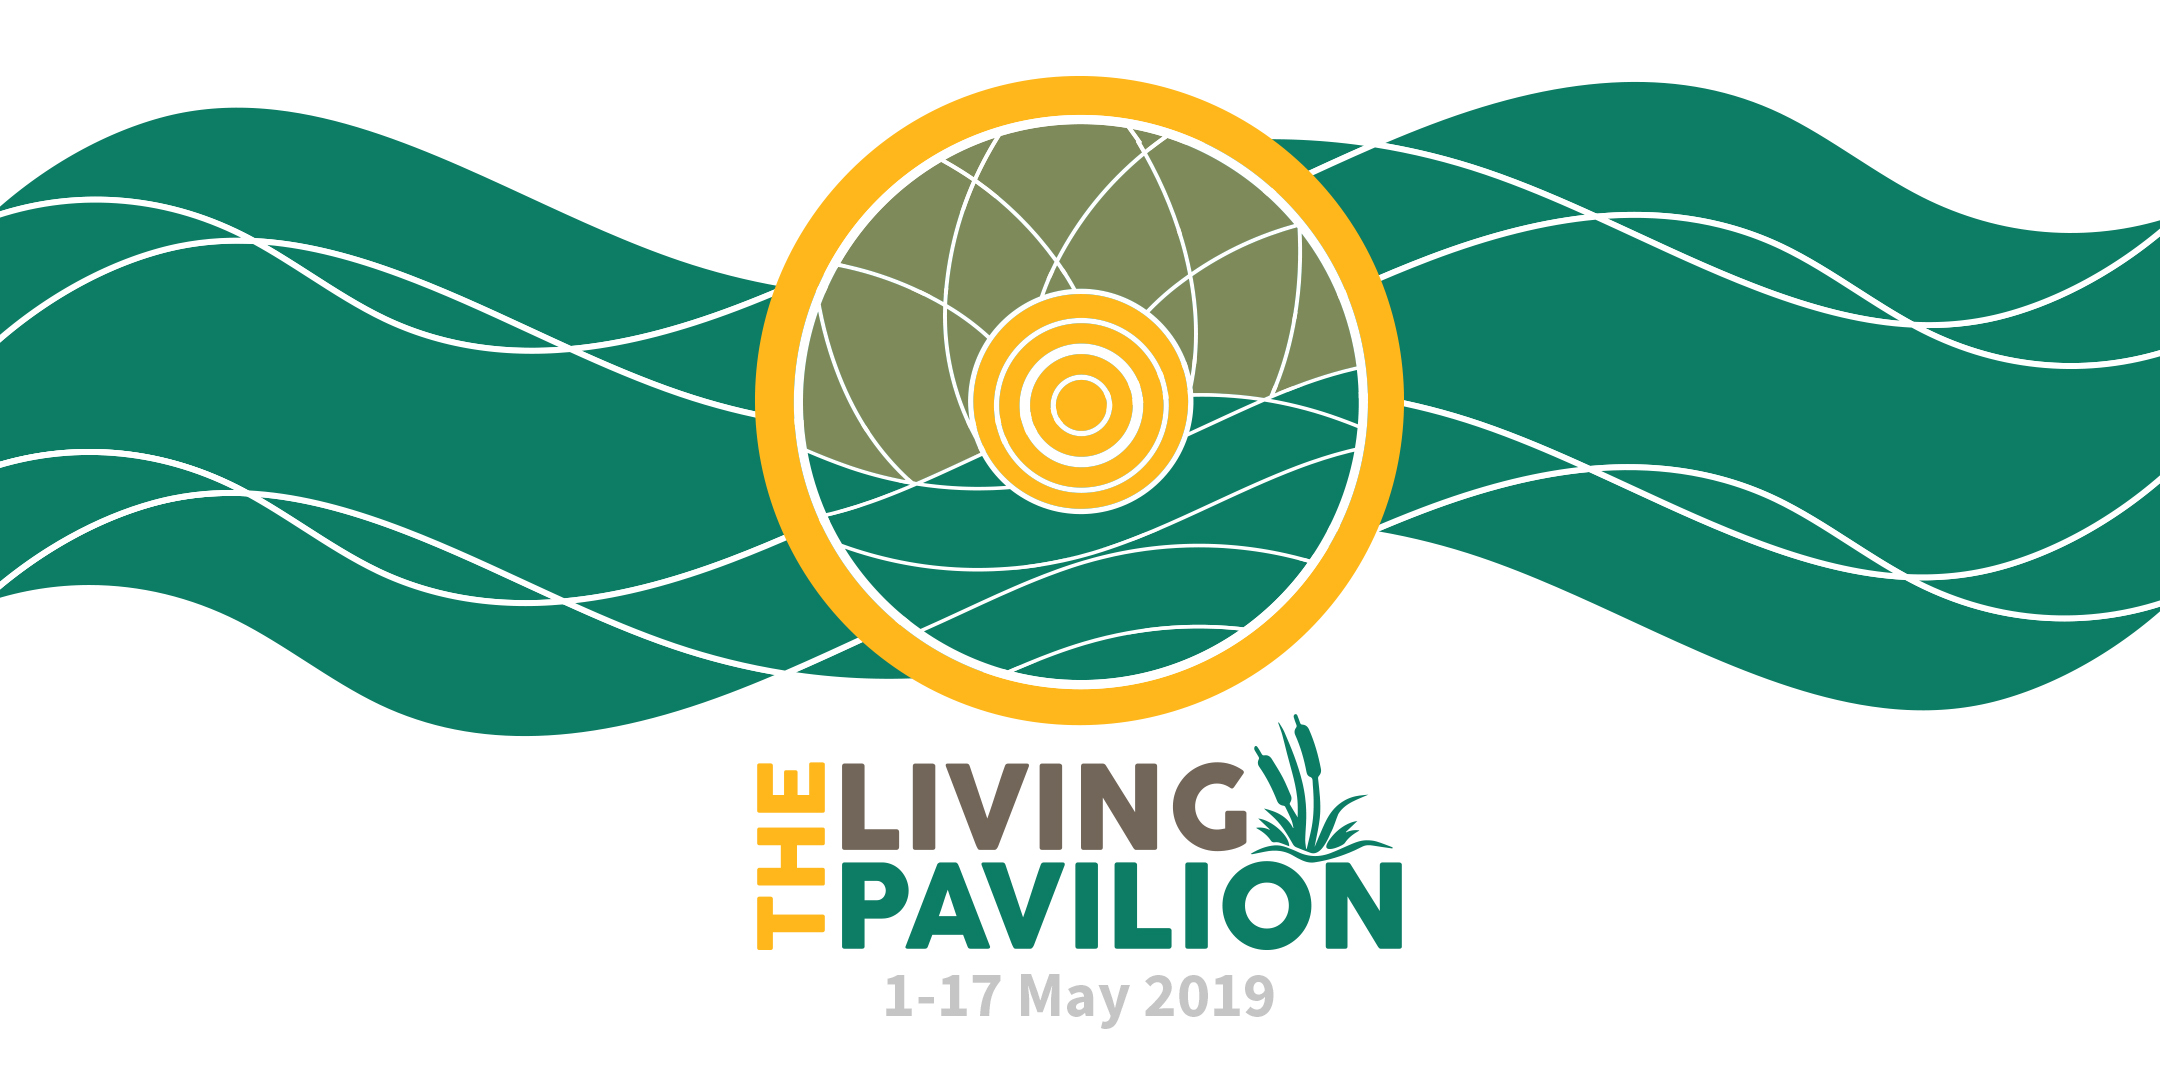 Living Pavilion, 1 of May to 17 May 2019